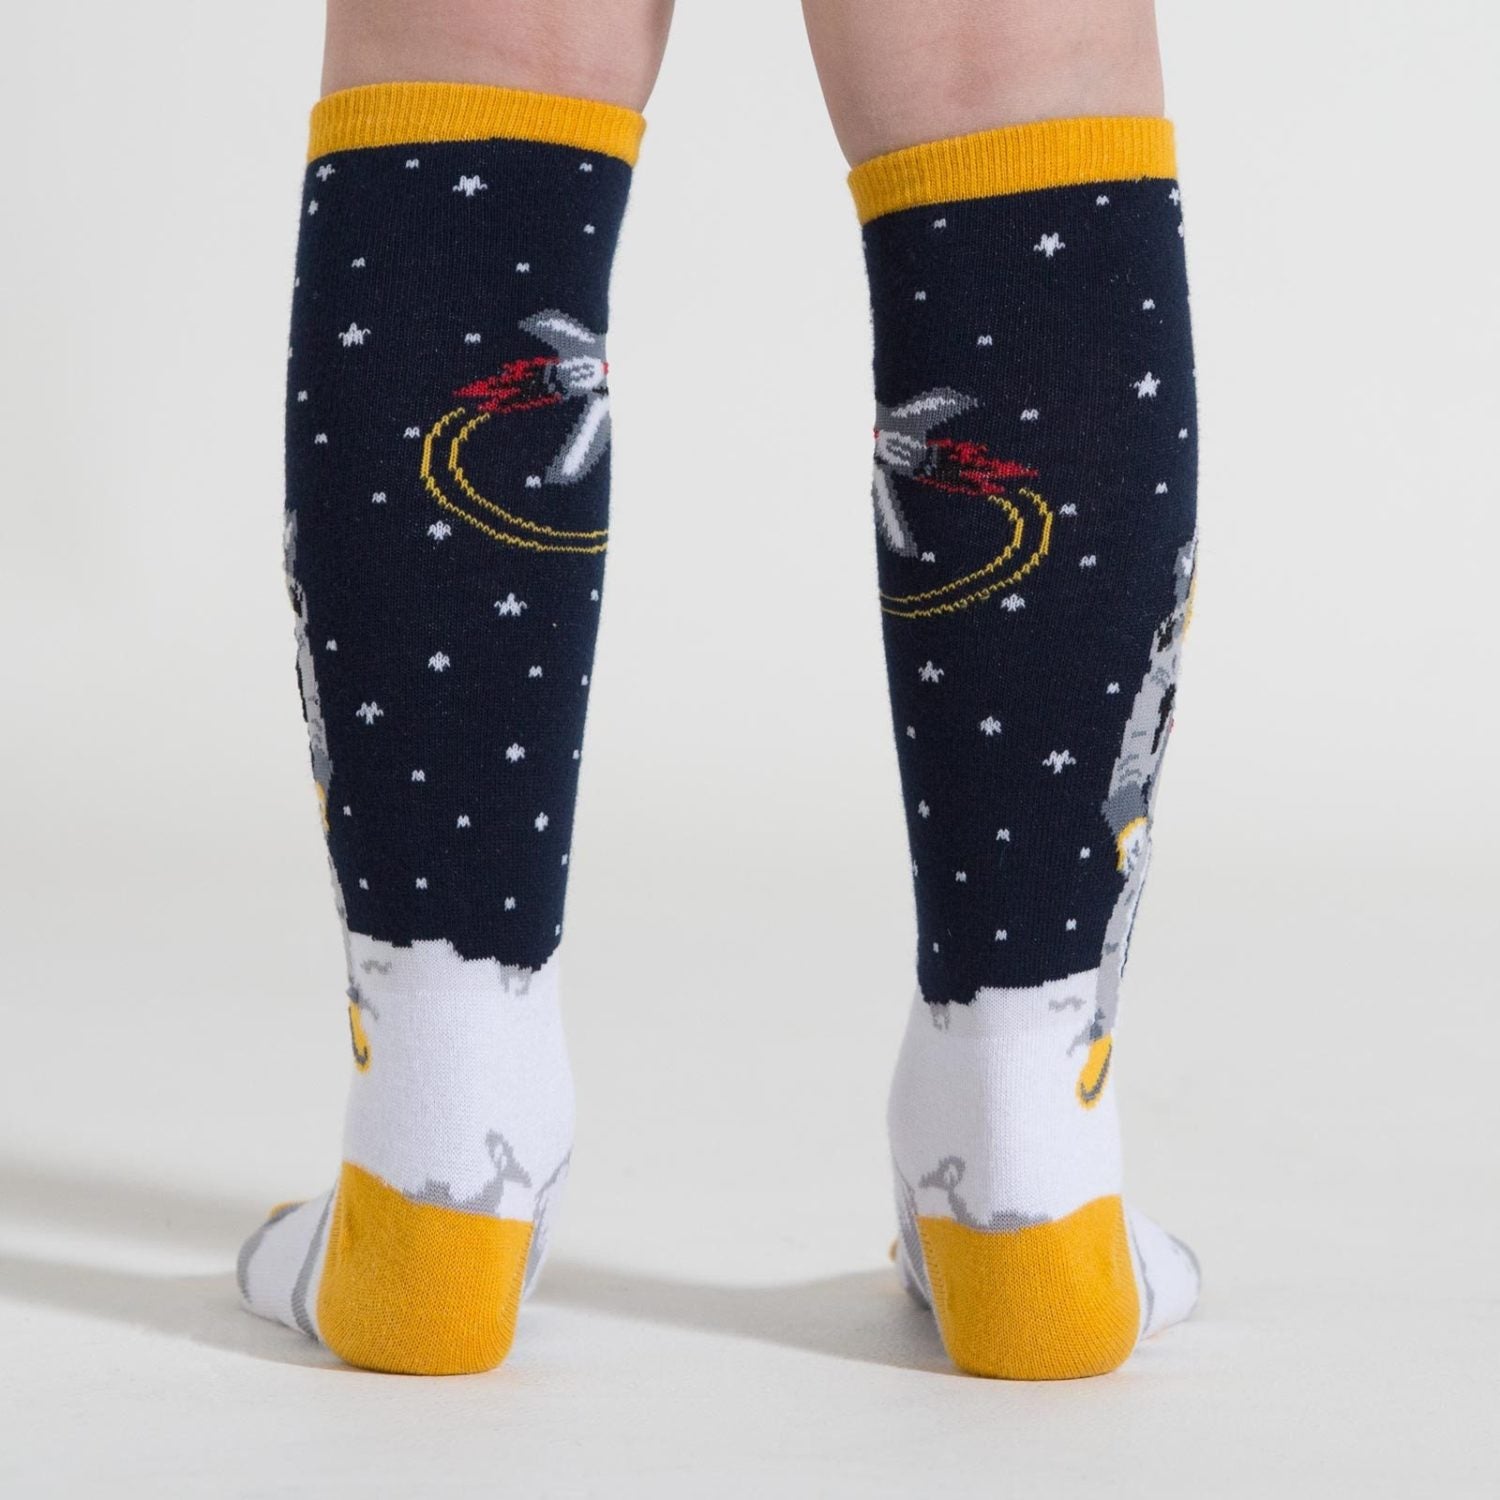 One Small Step Kid's Knee High Socks (Ages 7-10)